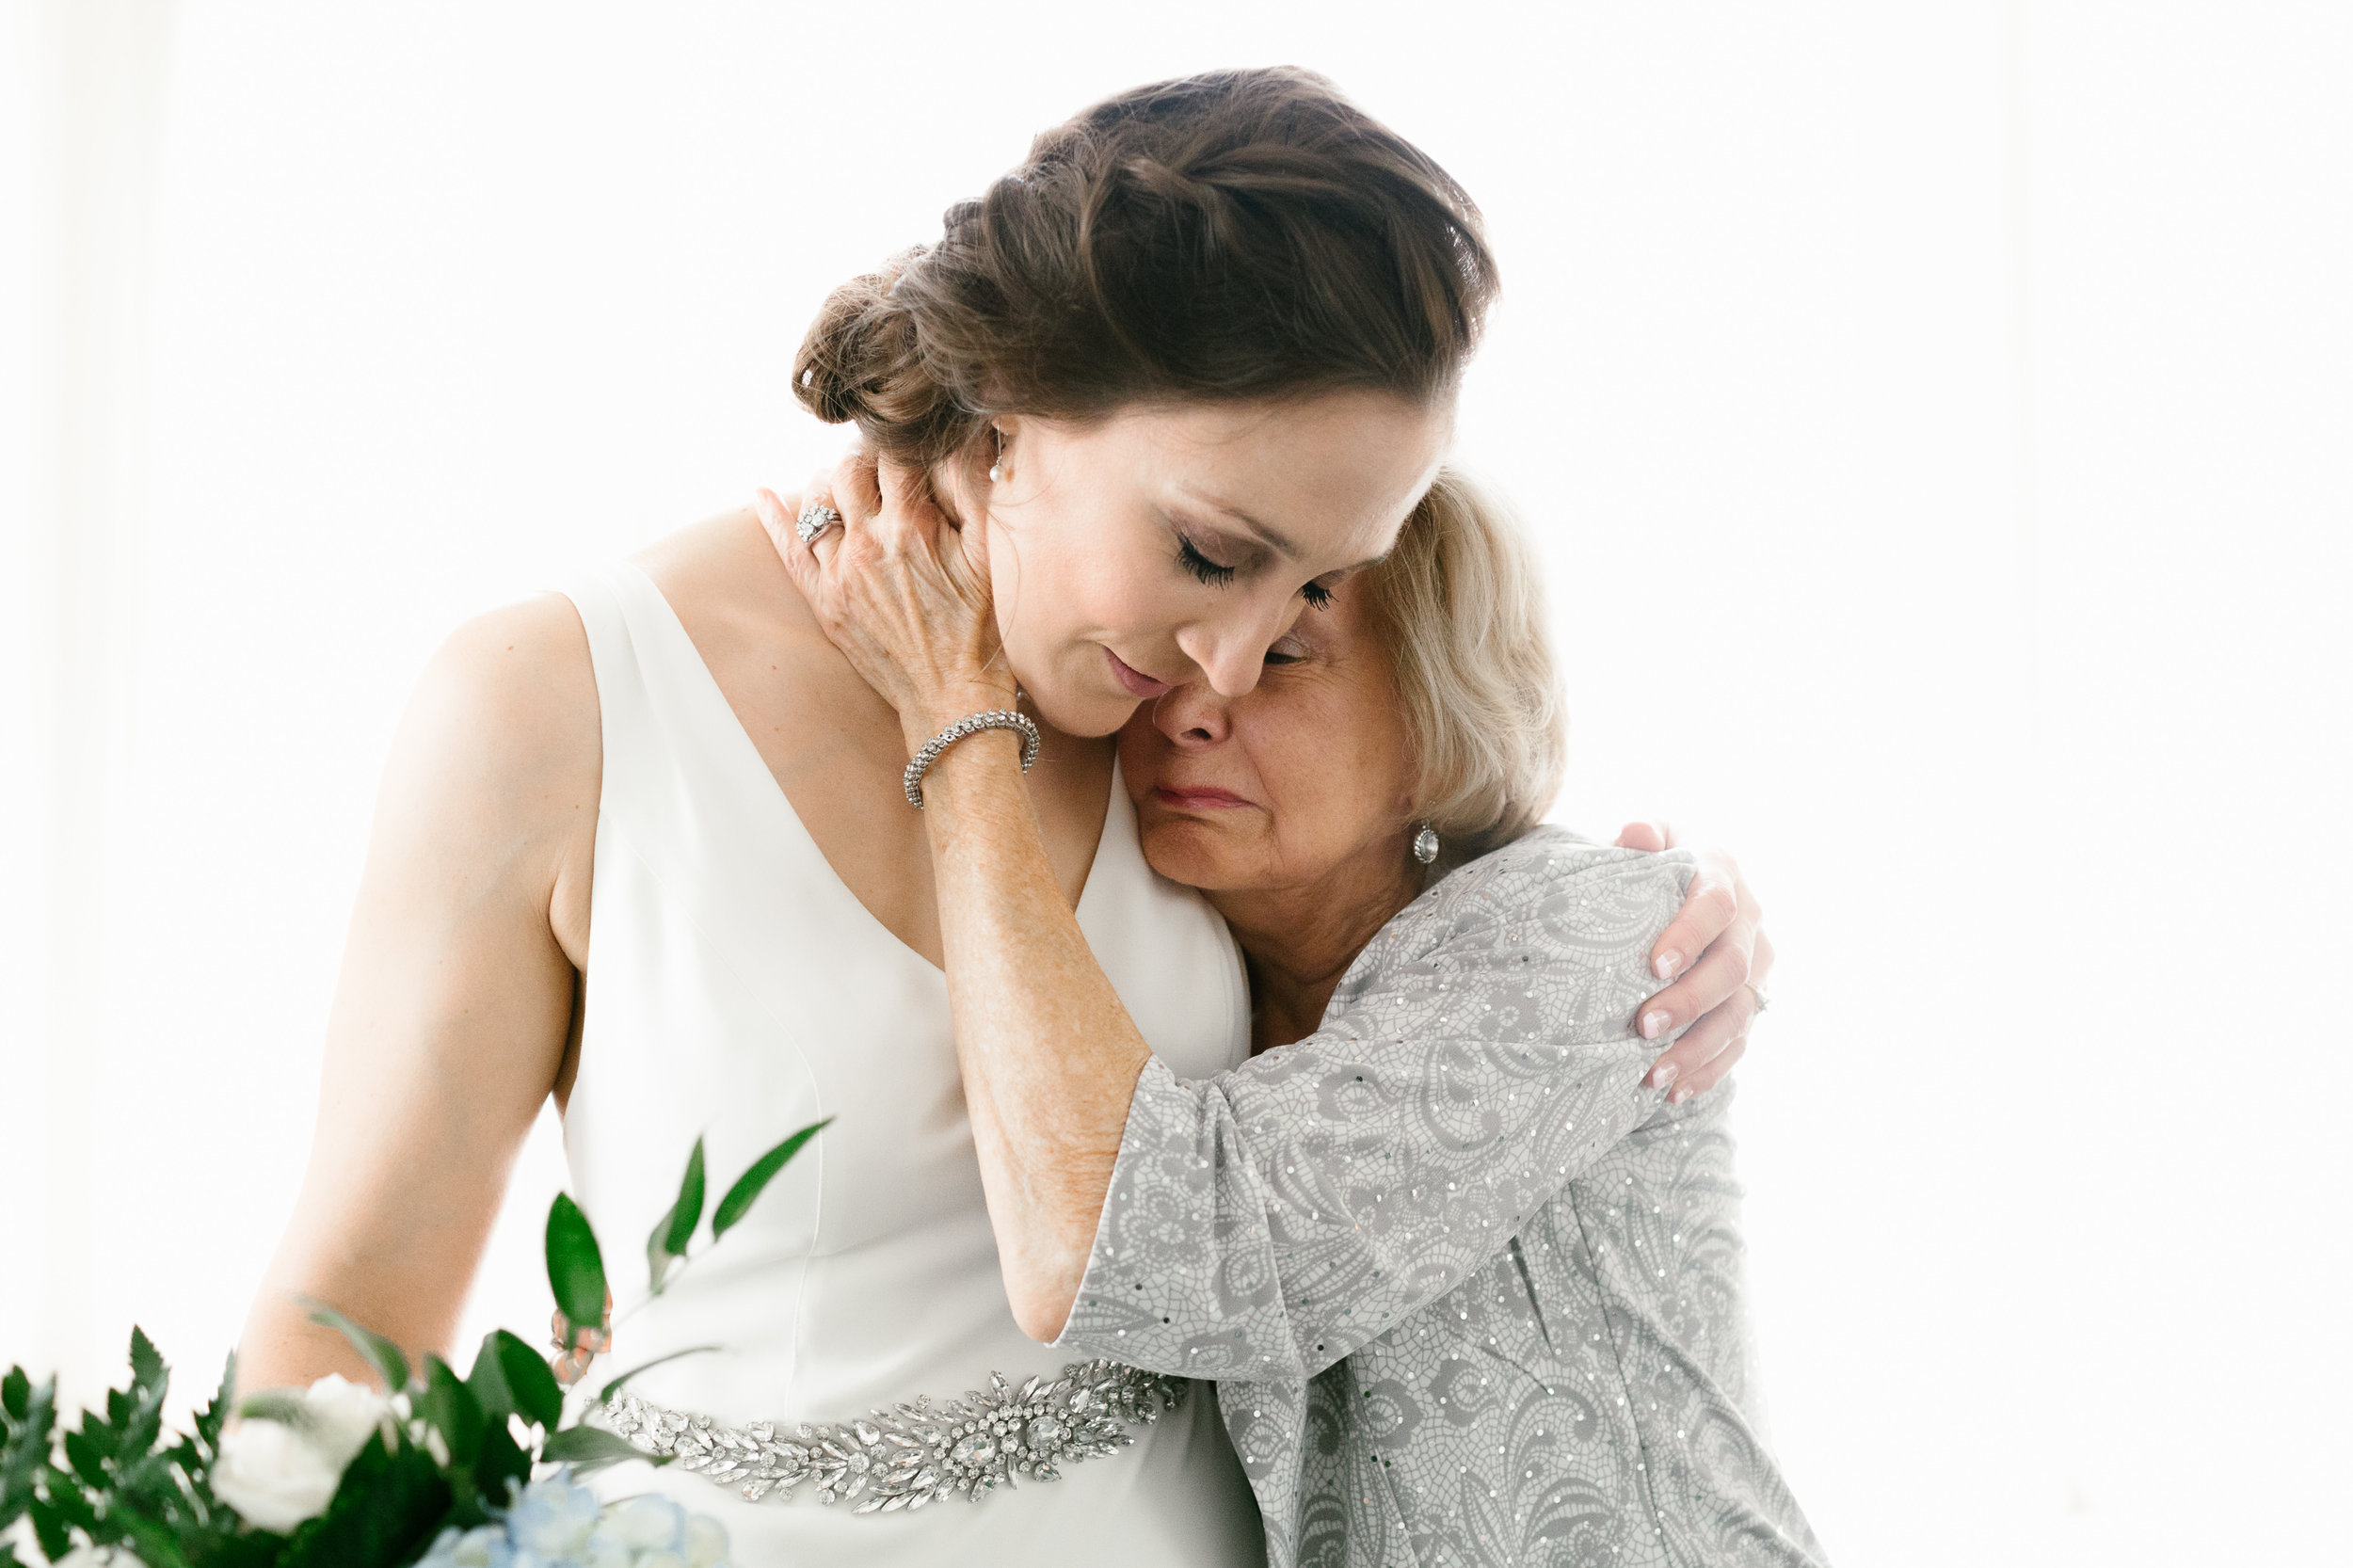 A bride and an older woman embrace.